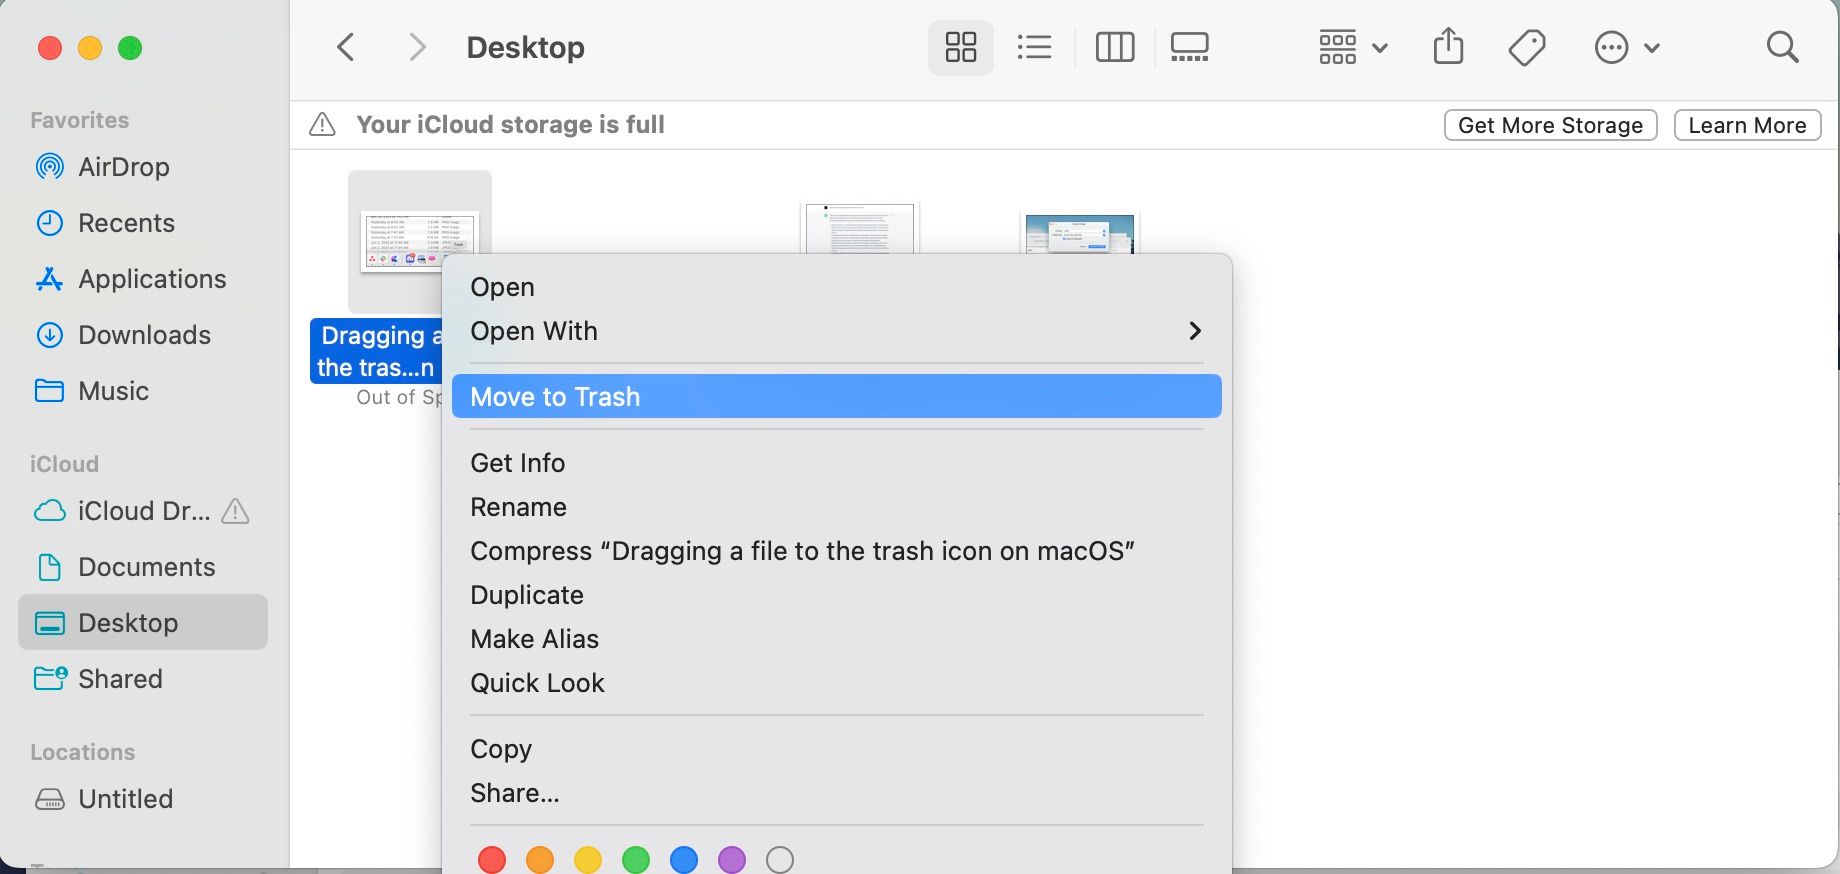 Move to Trash option in the context menu in Finder on macOS